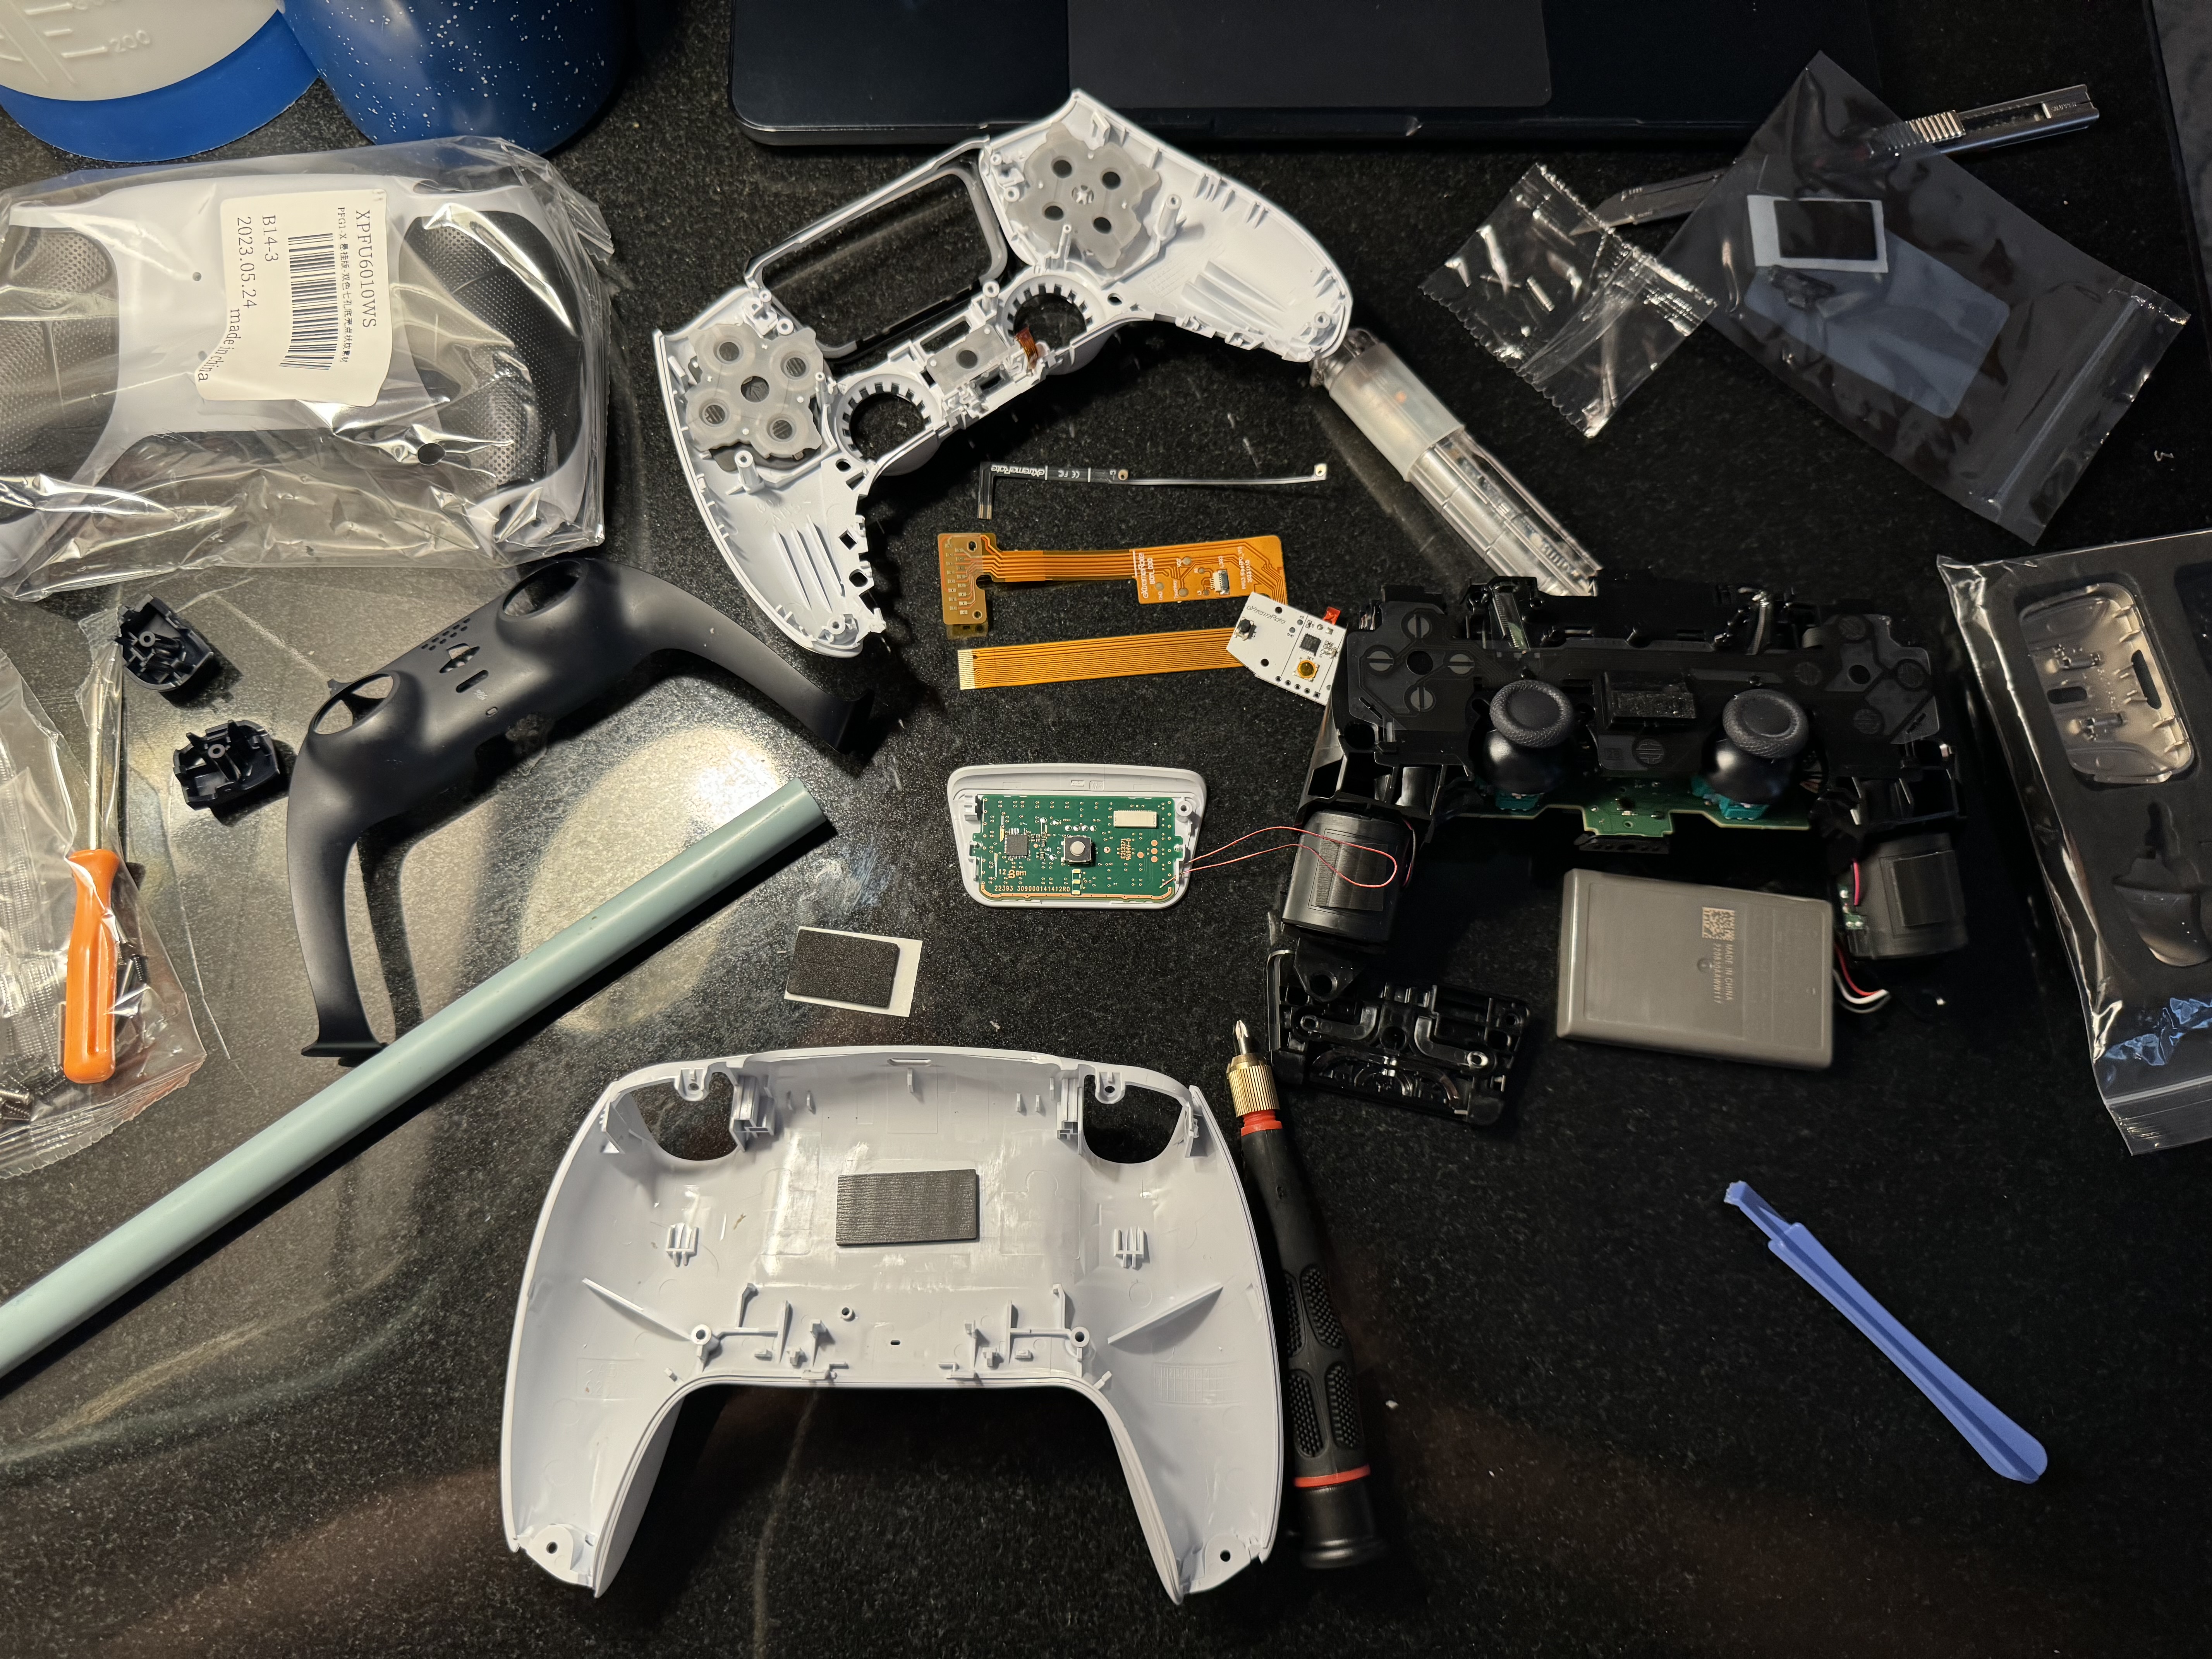 I Tore Apart My PS5 Controller And You Can Too! - Aftermath